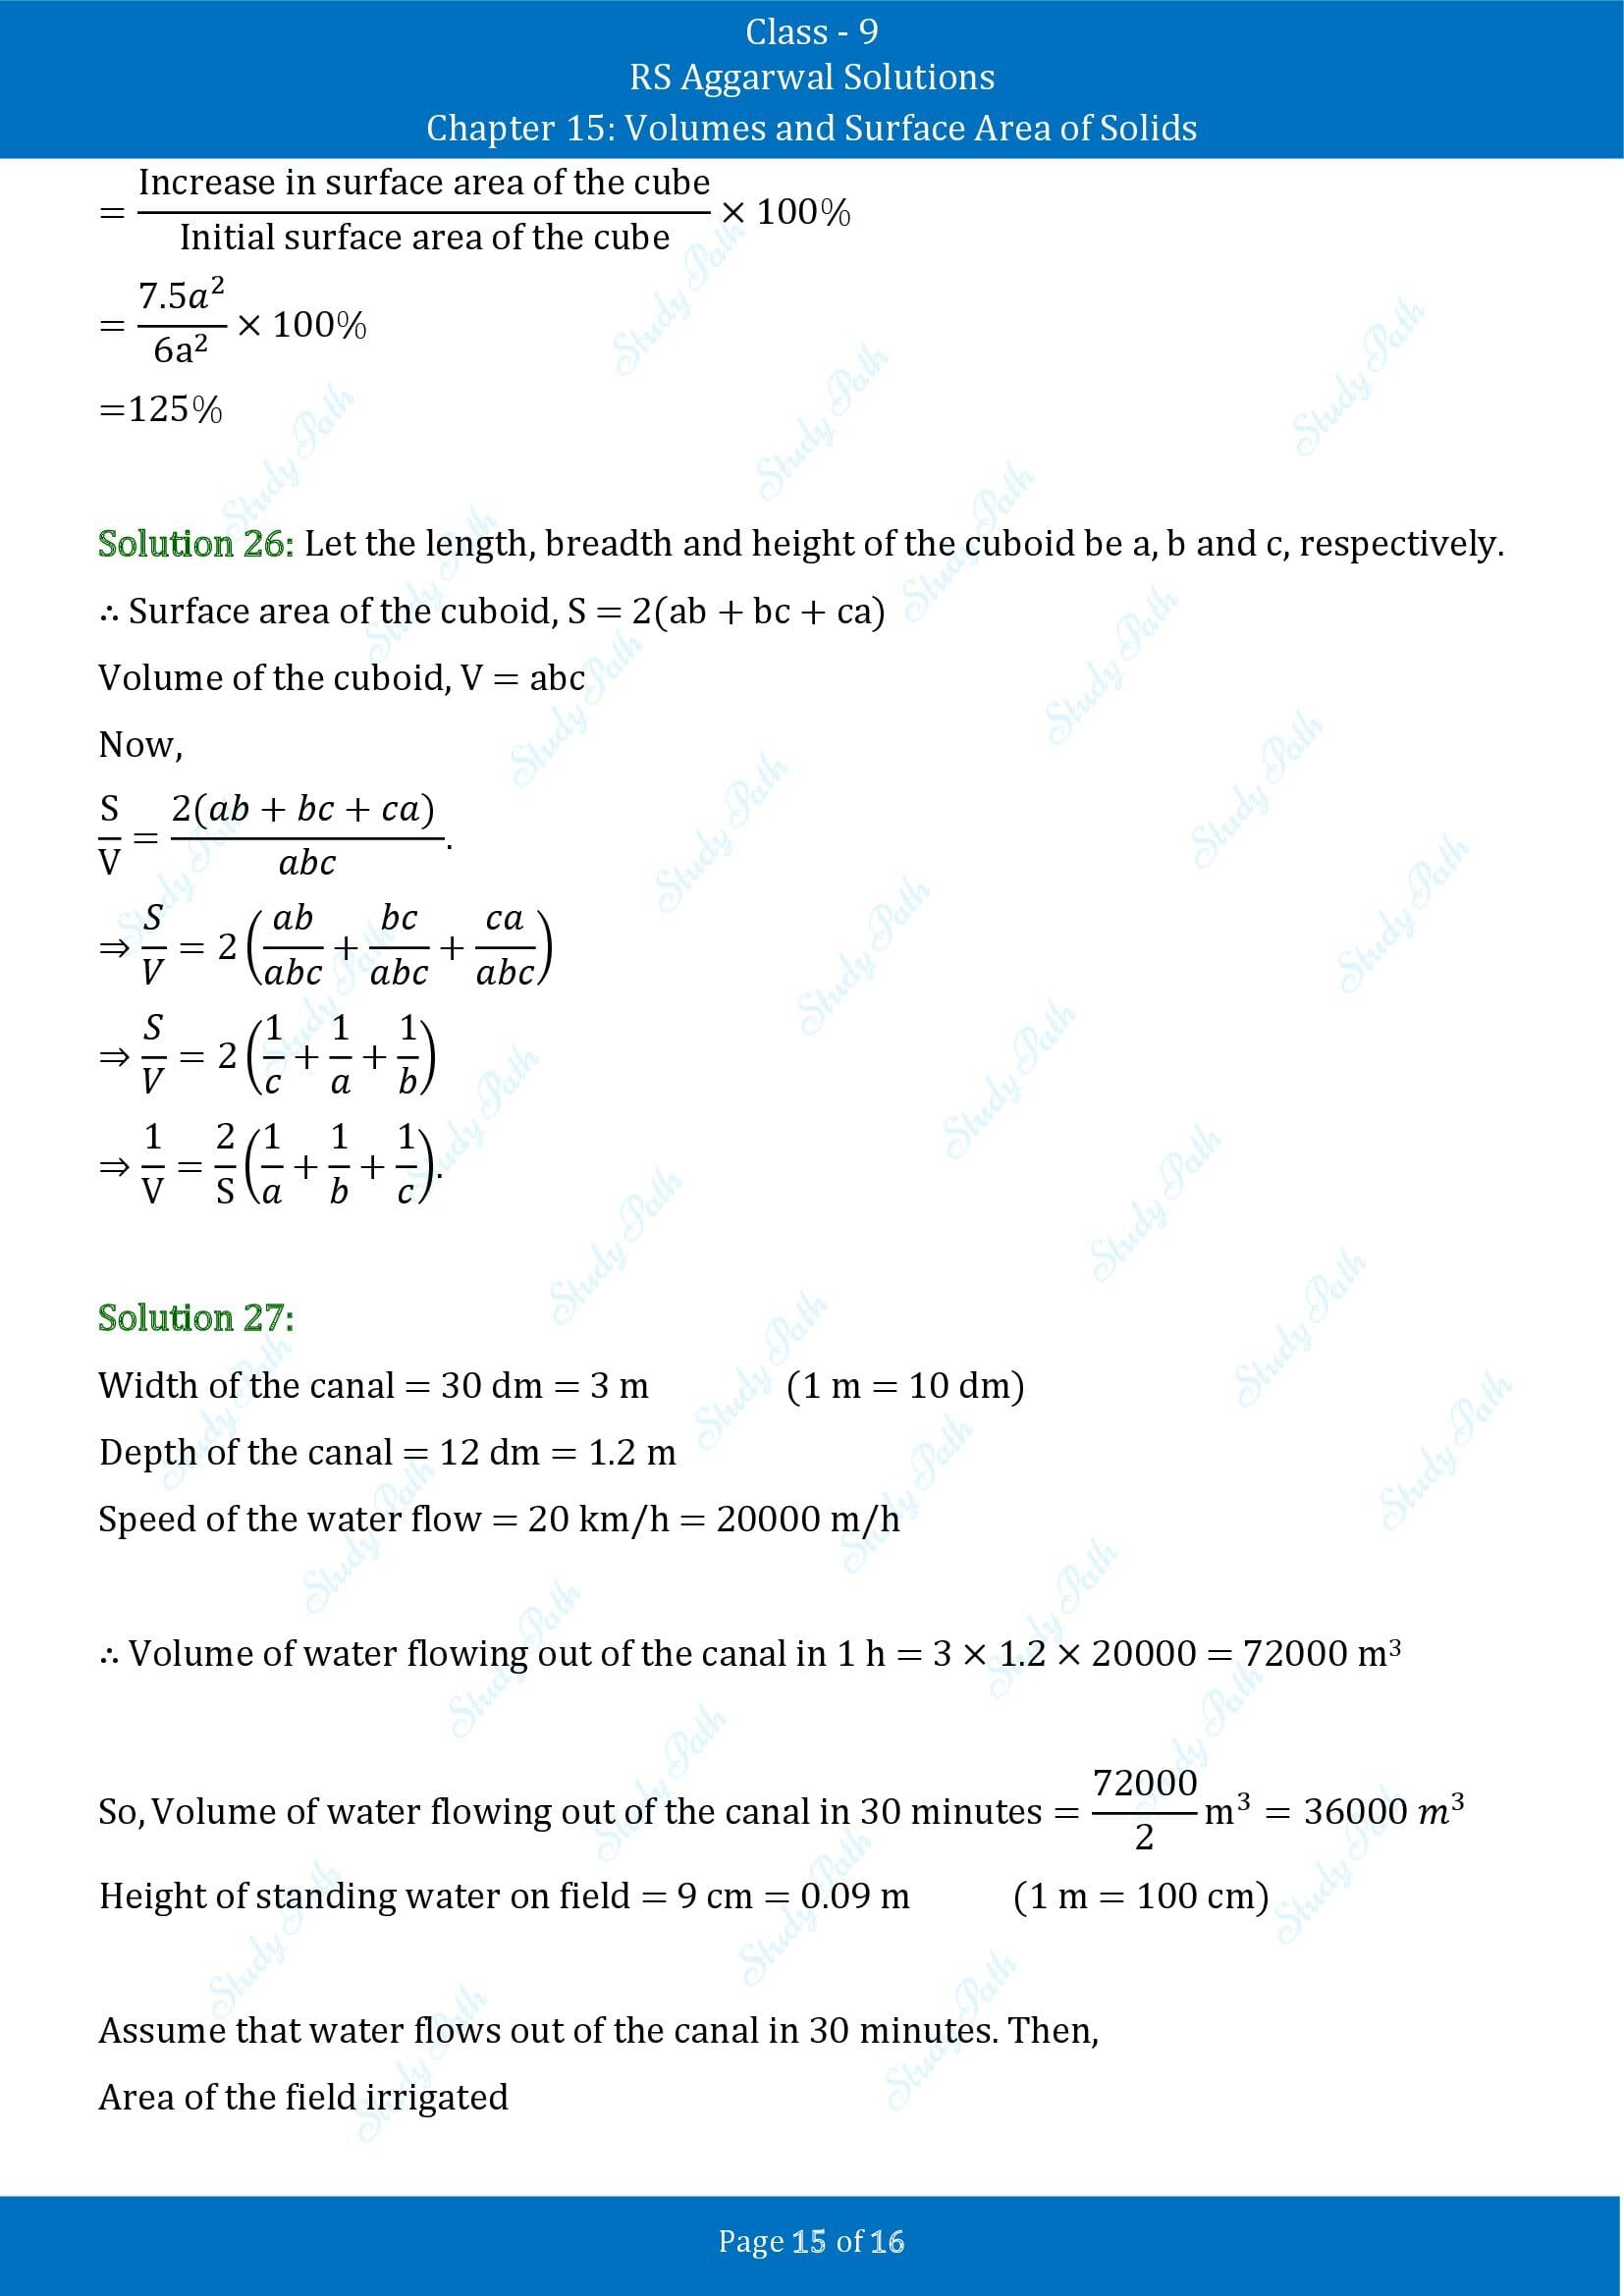 RS Aggarwal Solutions Class 9 Chapter 15 Volumes and Surface Area of Solids Exercise 15A 00015